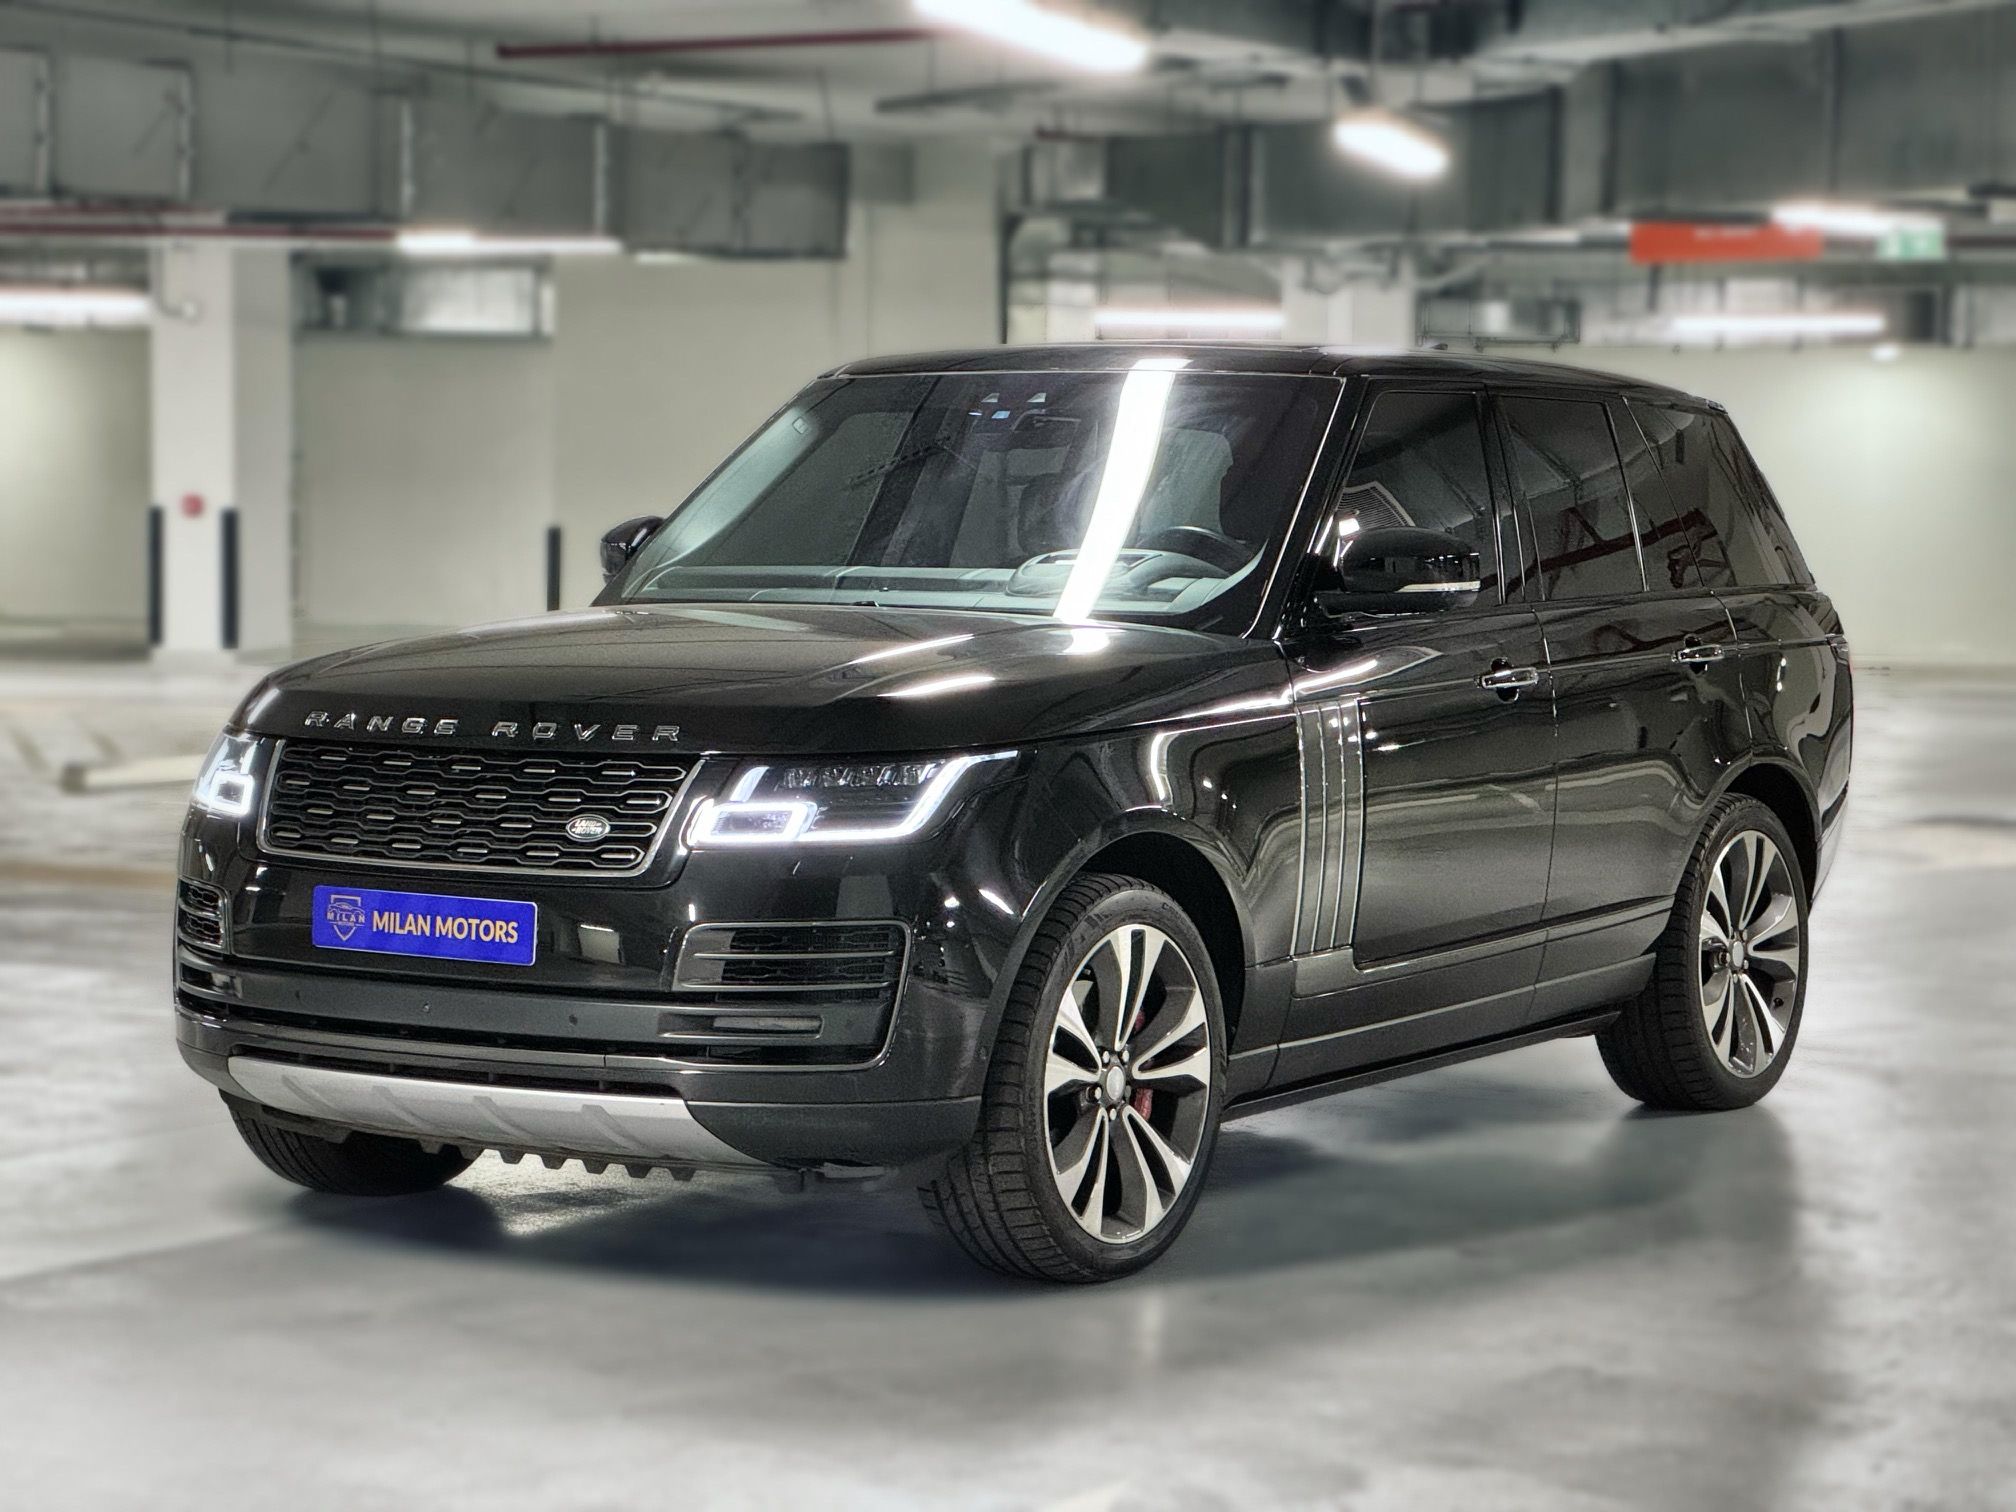 Range Rover SV Autobiography 2020, Car in Brand new condition, 1 year warranty